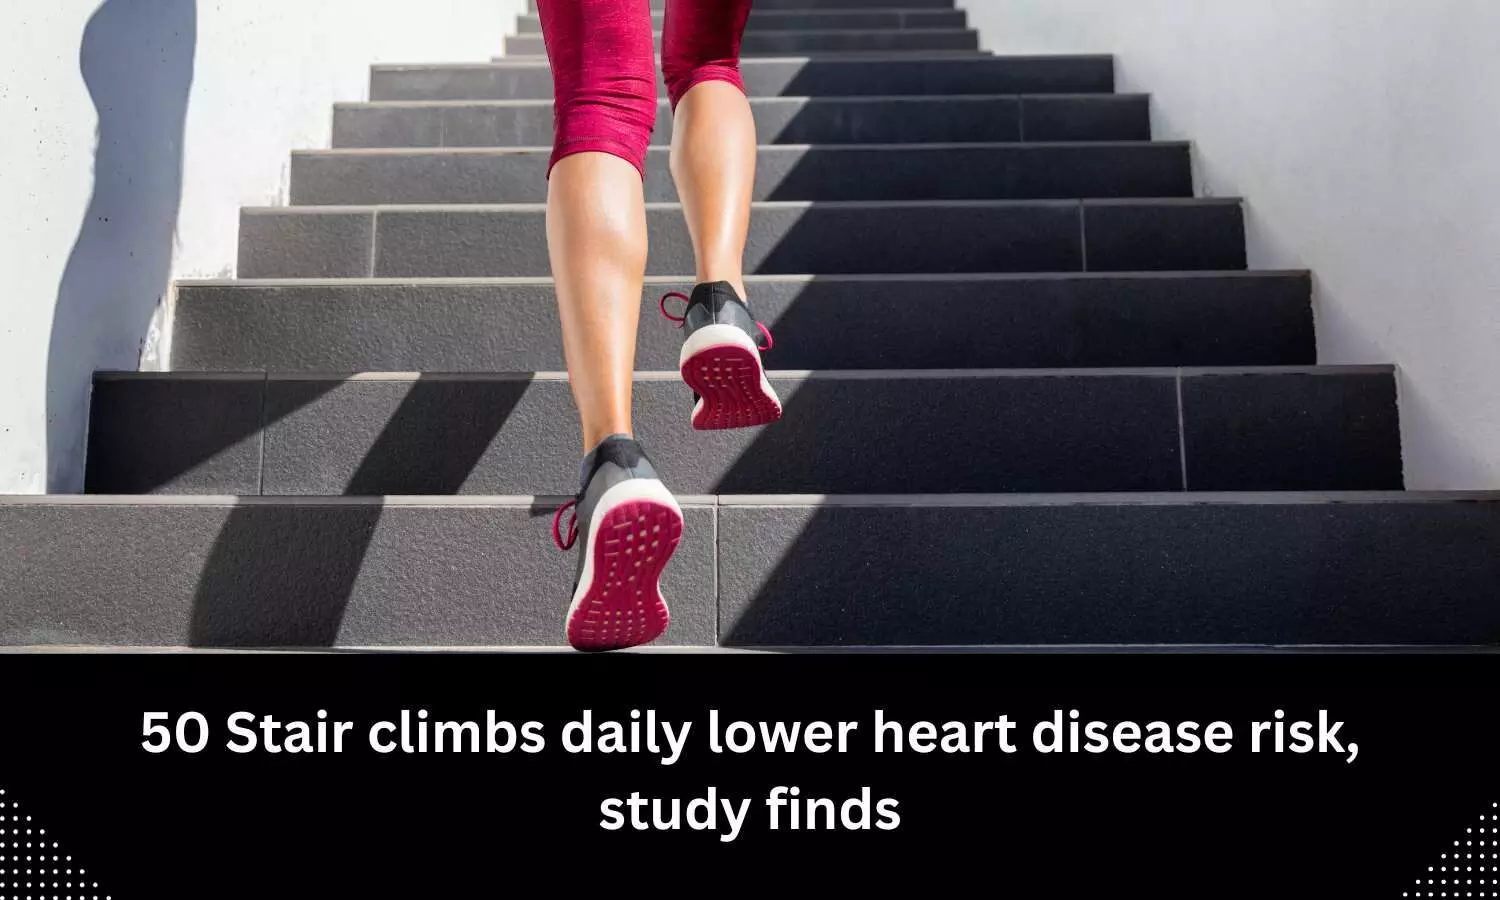 Climbing 50 stairs daily lower heart disease risk: Study